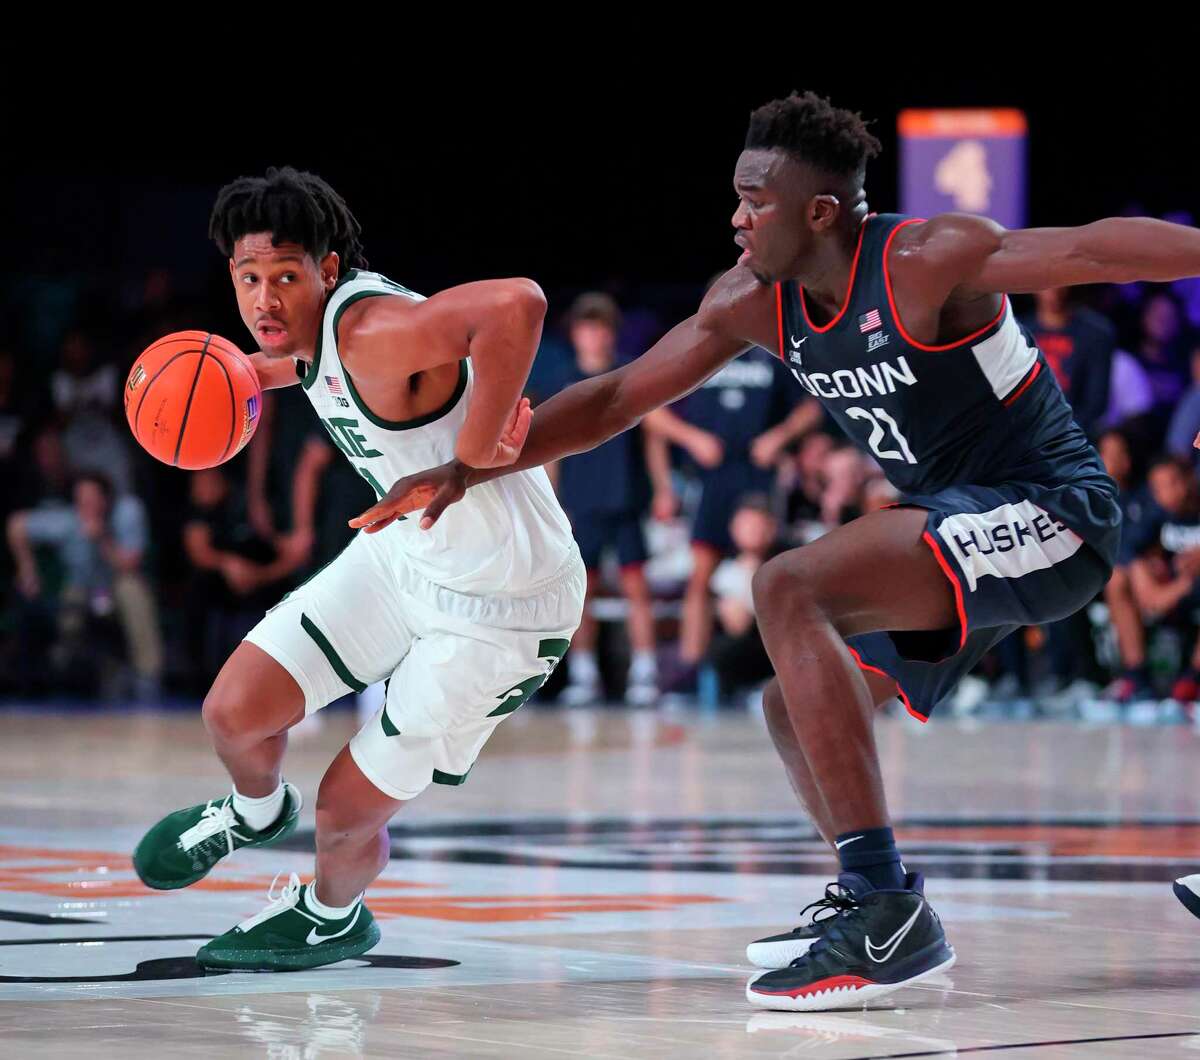 In this photo provided by Bahamas Visual Services, Michigan State guard A.J. Hoggard (11) drives as Connecticut forward Adama Sanogo (21) defends during an NCAA college basketball game at Paradise Island, Bahamas, Thursday, Nov. 25, 2021. (Tim Aylen/Bahamas Visual Services via AP)